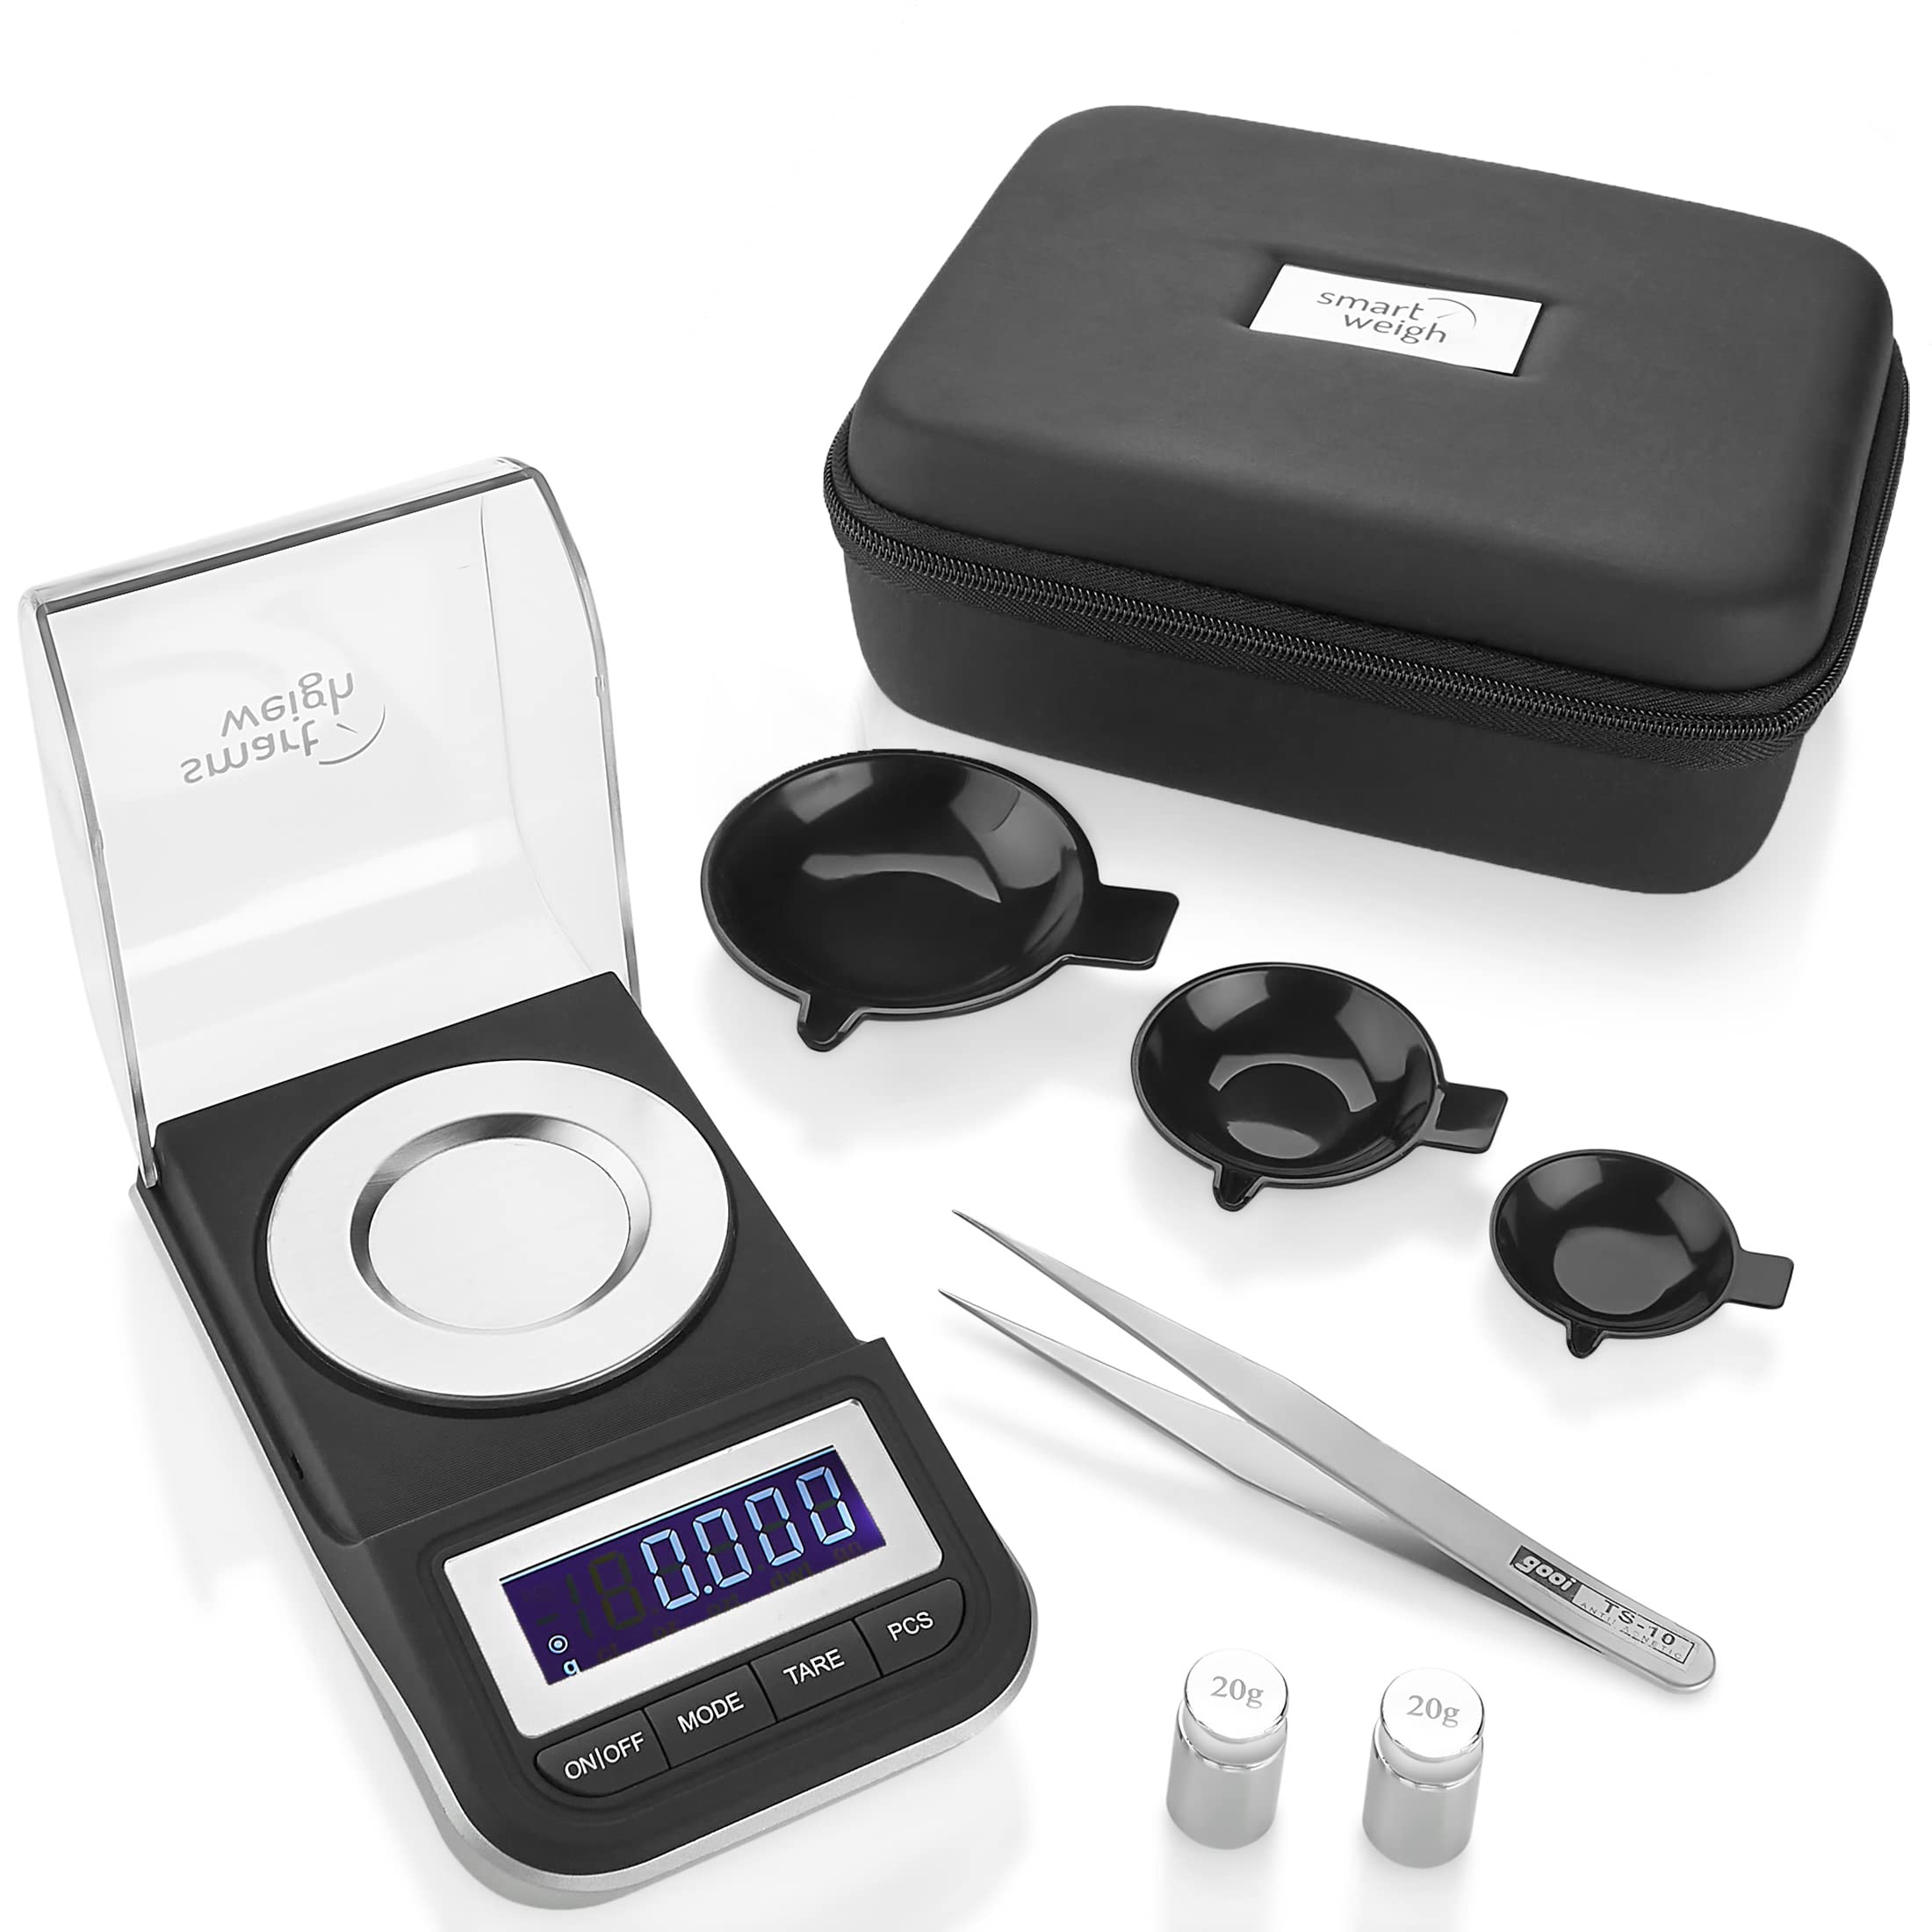 Smart Weigh 50g x 0.001 Grams, Premium High Precision Digital Milligram Scale, Includes Tweezers, Calibration Weights,Three Weighing Pans and Case  - Like New